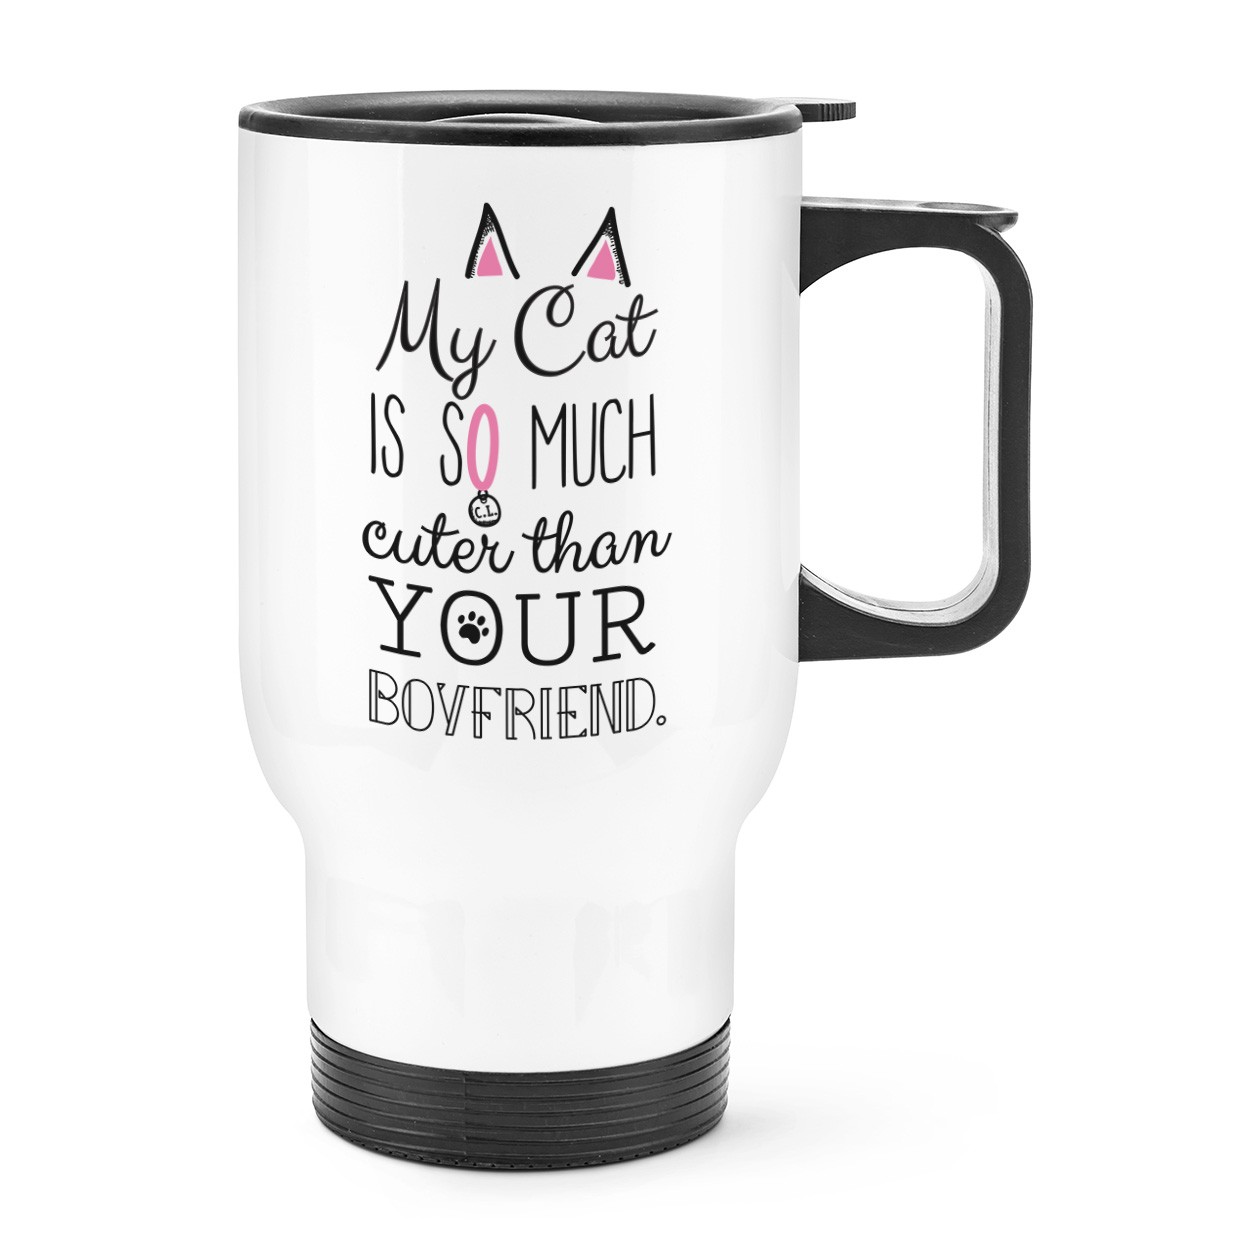 My Cat Is So Much Cuter Than Your Boyfriend Travel Mug Cup With Handle